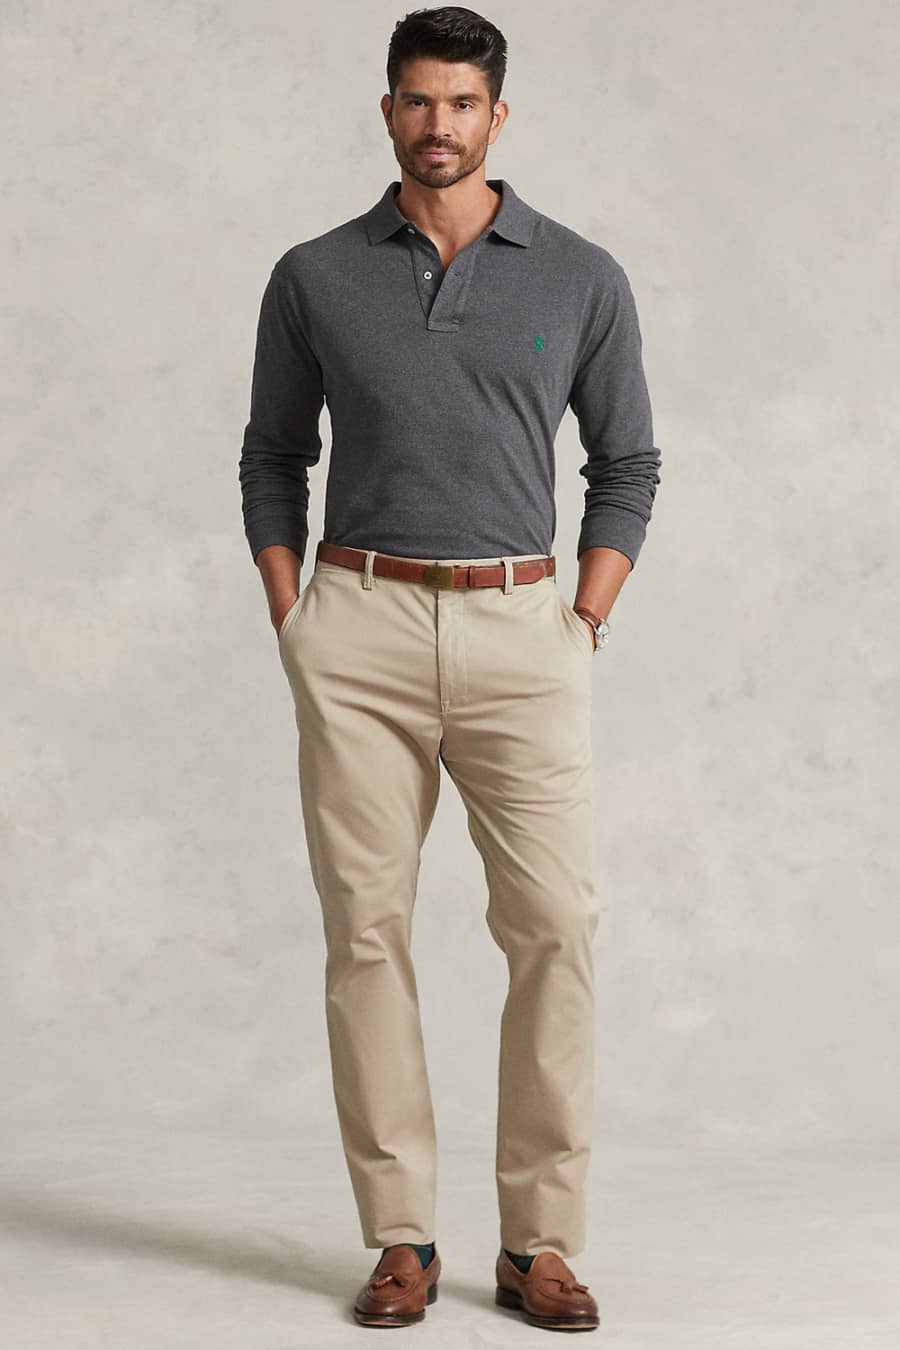 Men's khaki pants, long sleeve knitted grey polo shirt and brown loafers outfit